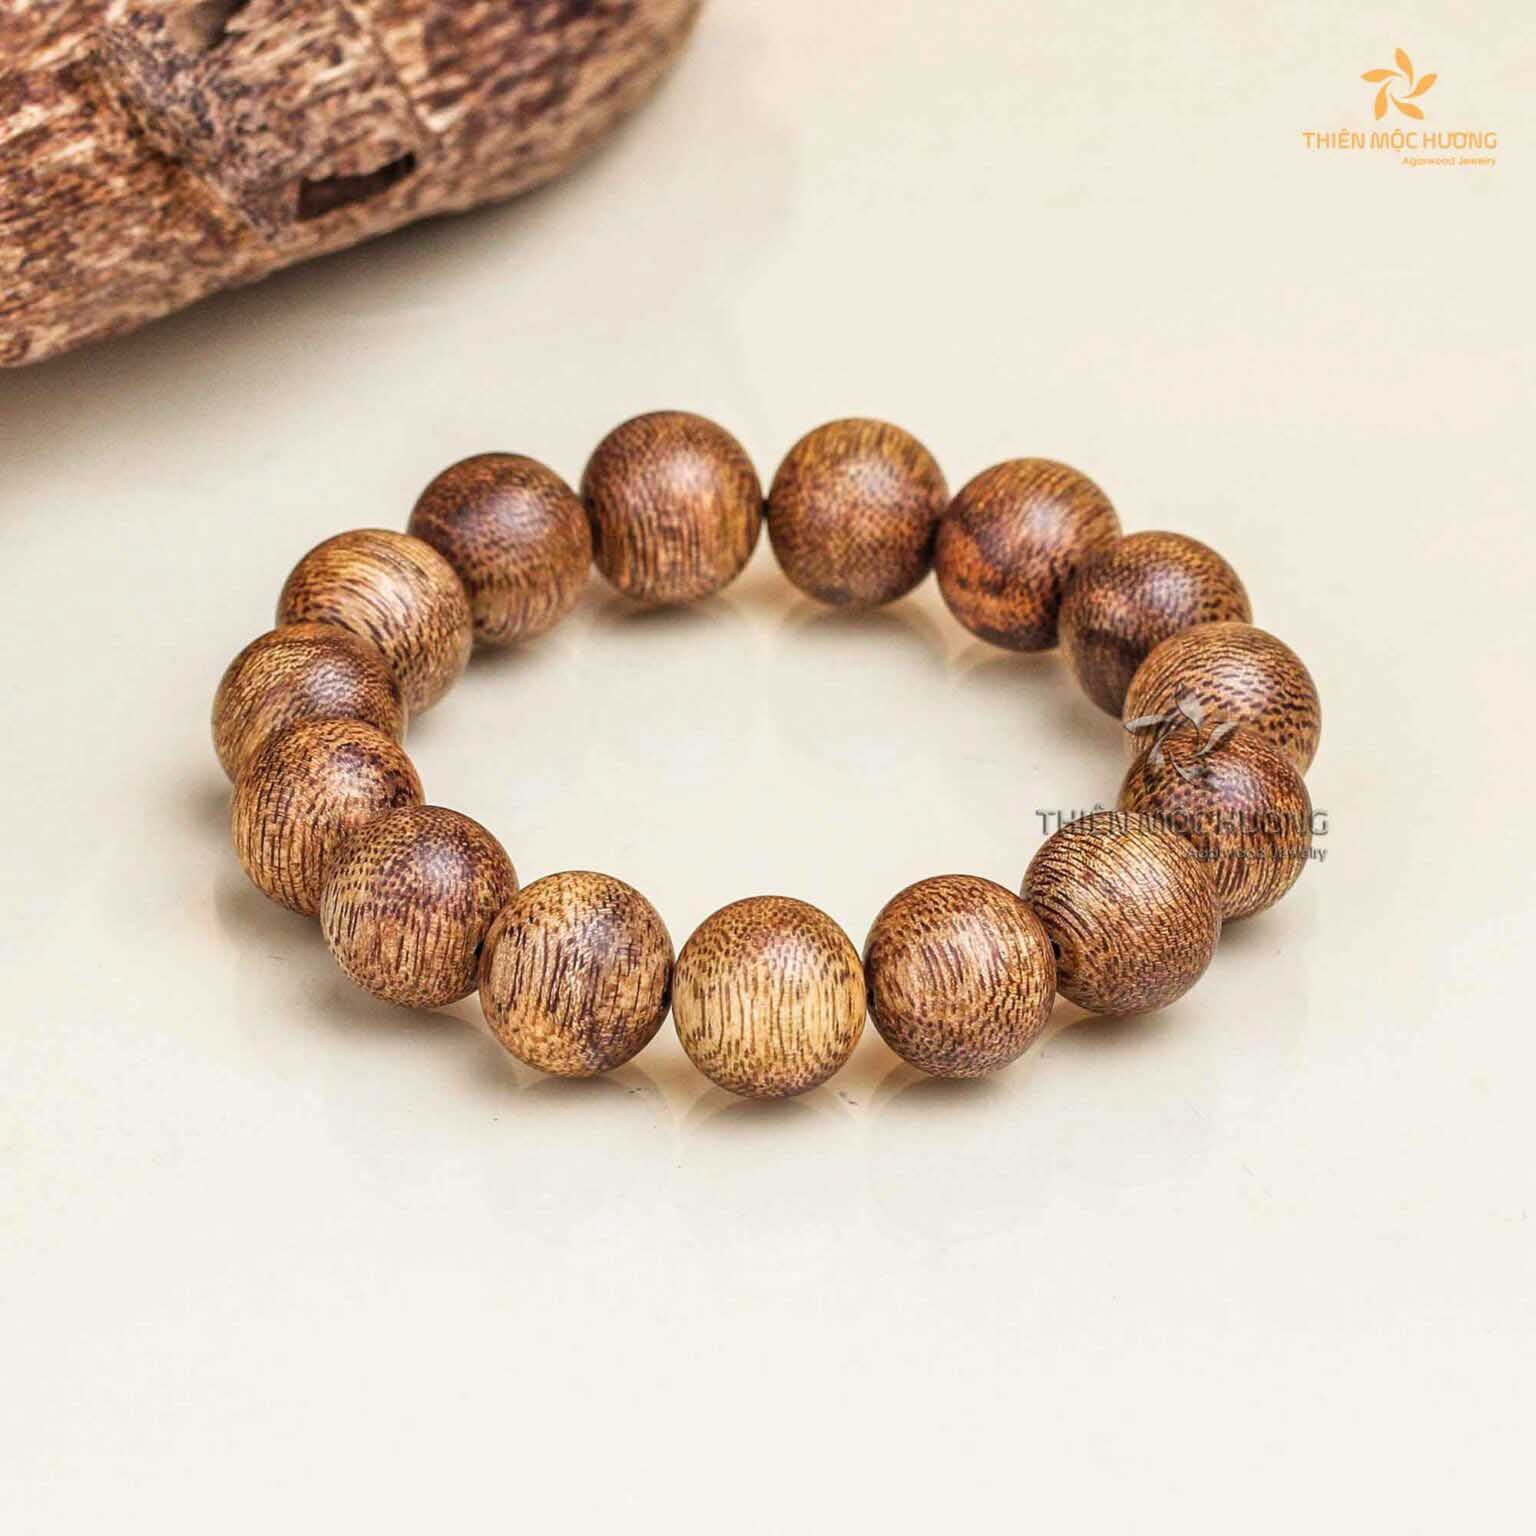 A minimalist design of best agarwood bracelet for women may be suitable for daily wear